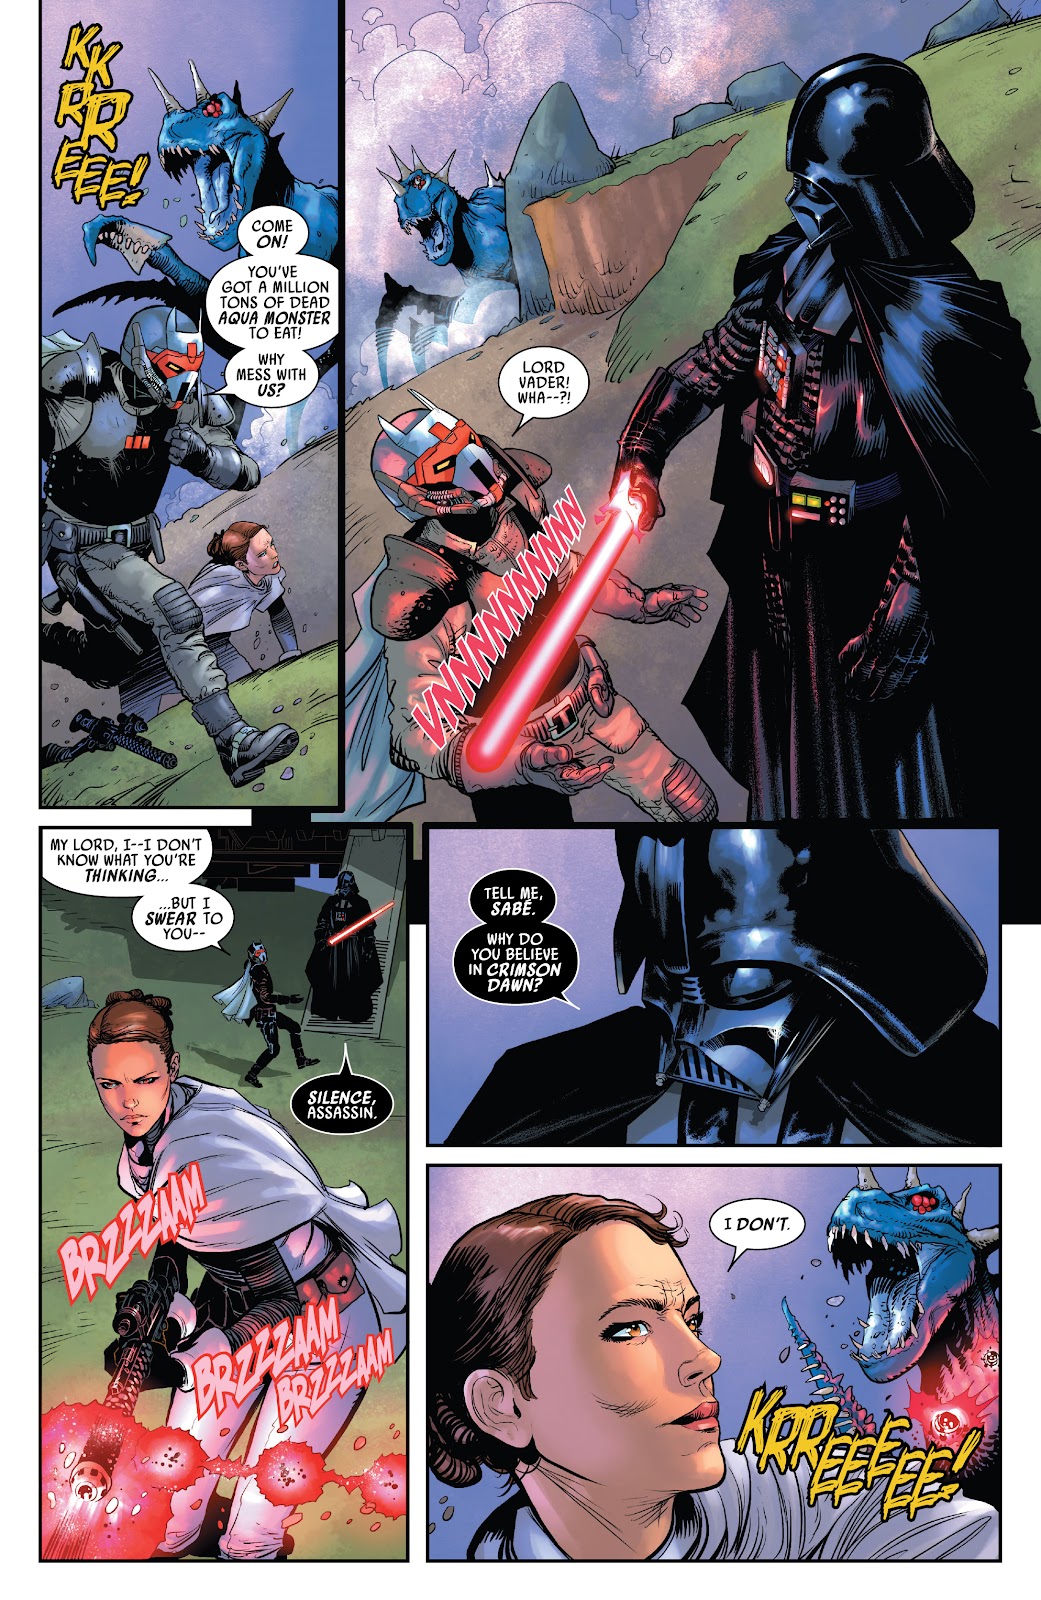 Darth Vader's View On Order And Chaos